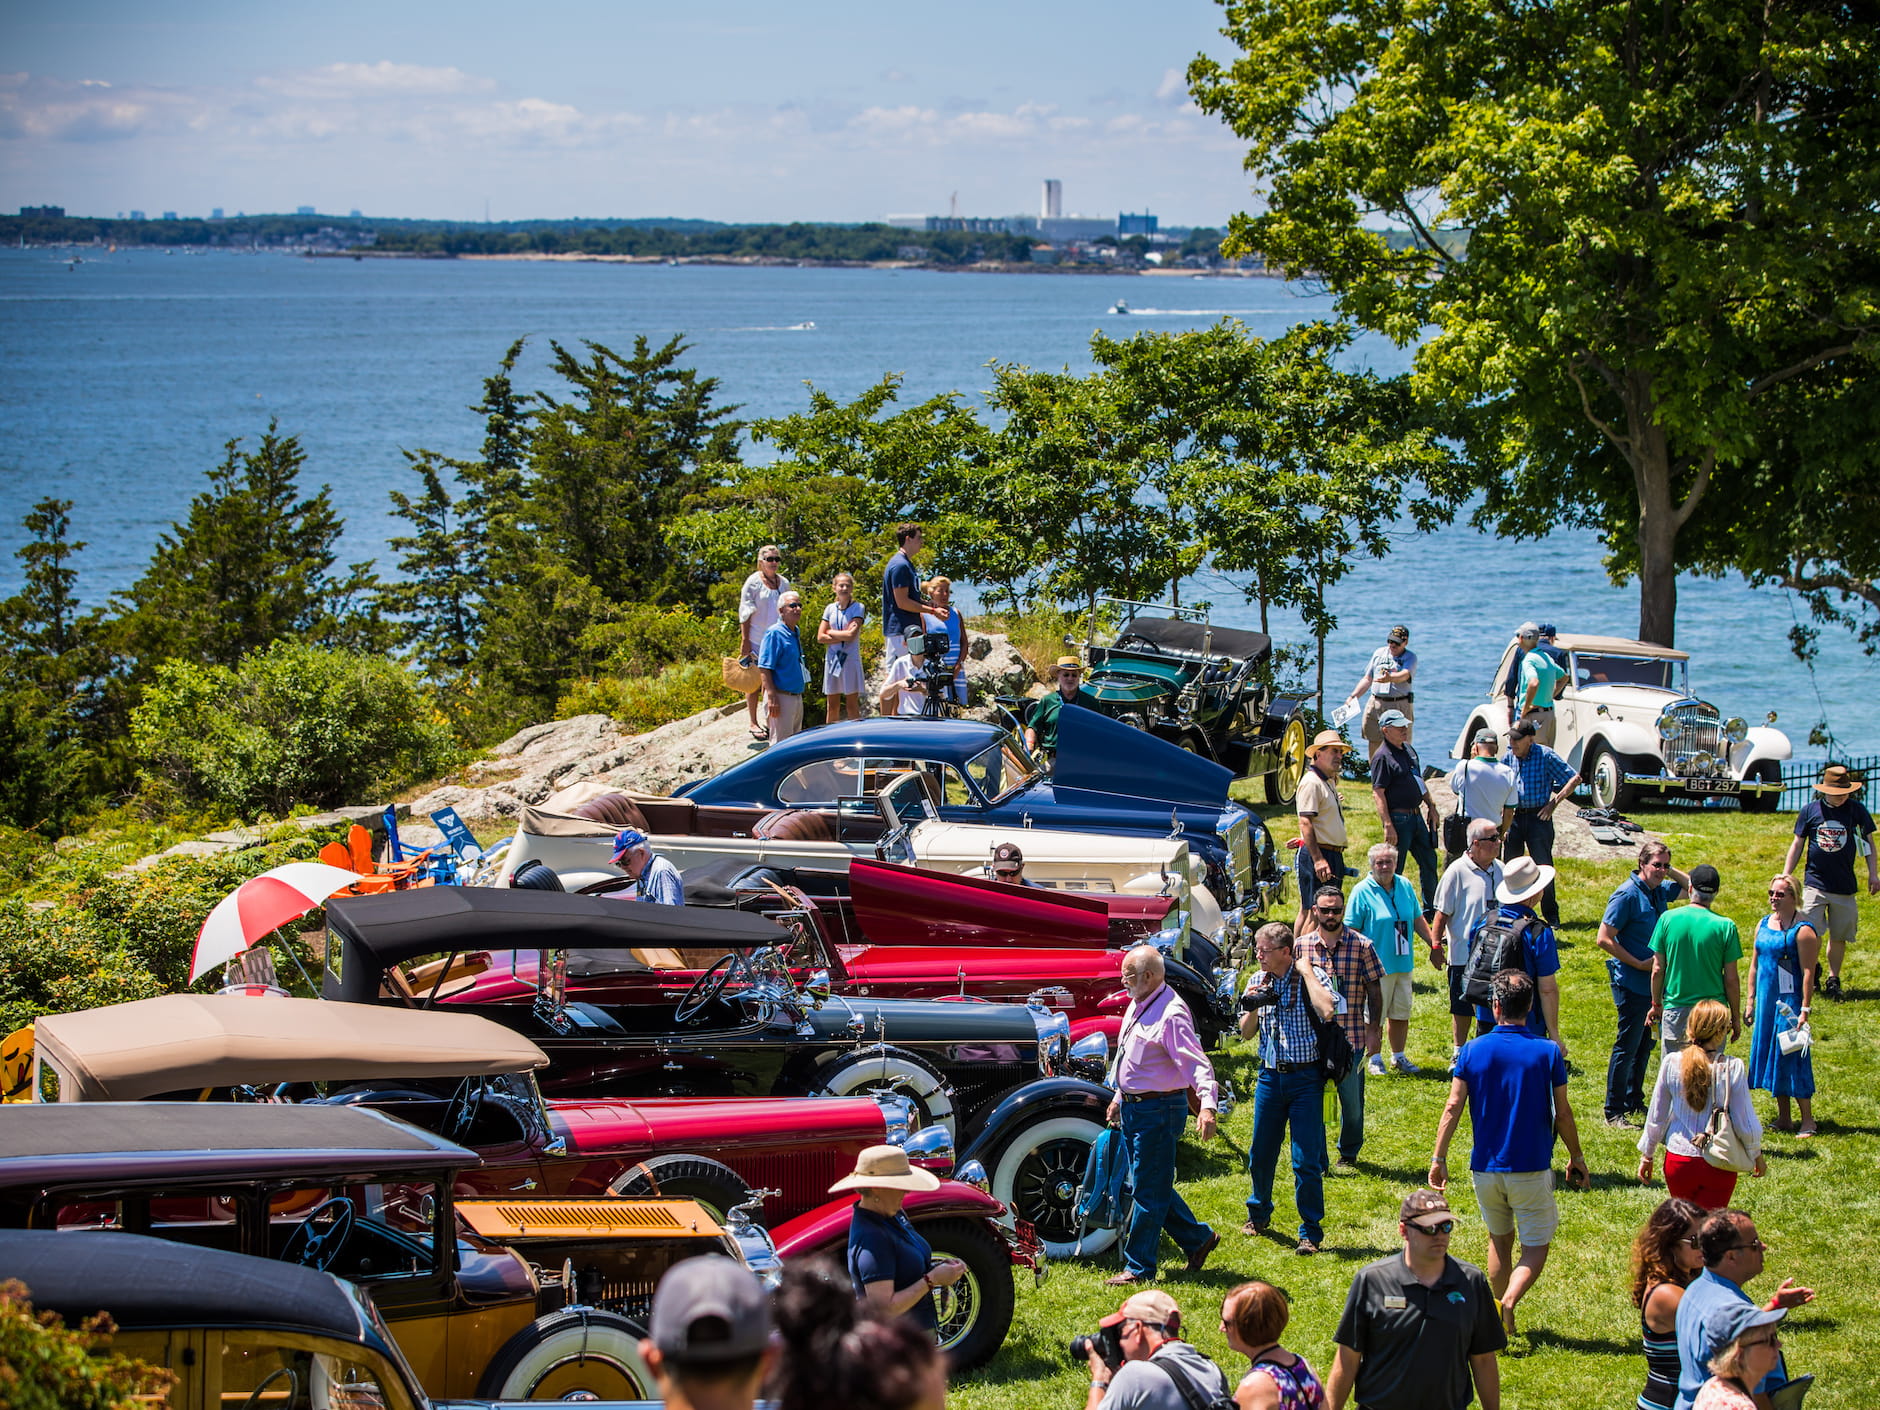 Attendees gather to look at classic cars at the Misselwood Concours d'Elegance at Endicott College. Photo by Deremer Studios LLC.